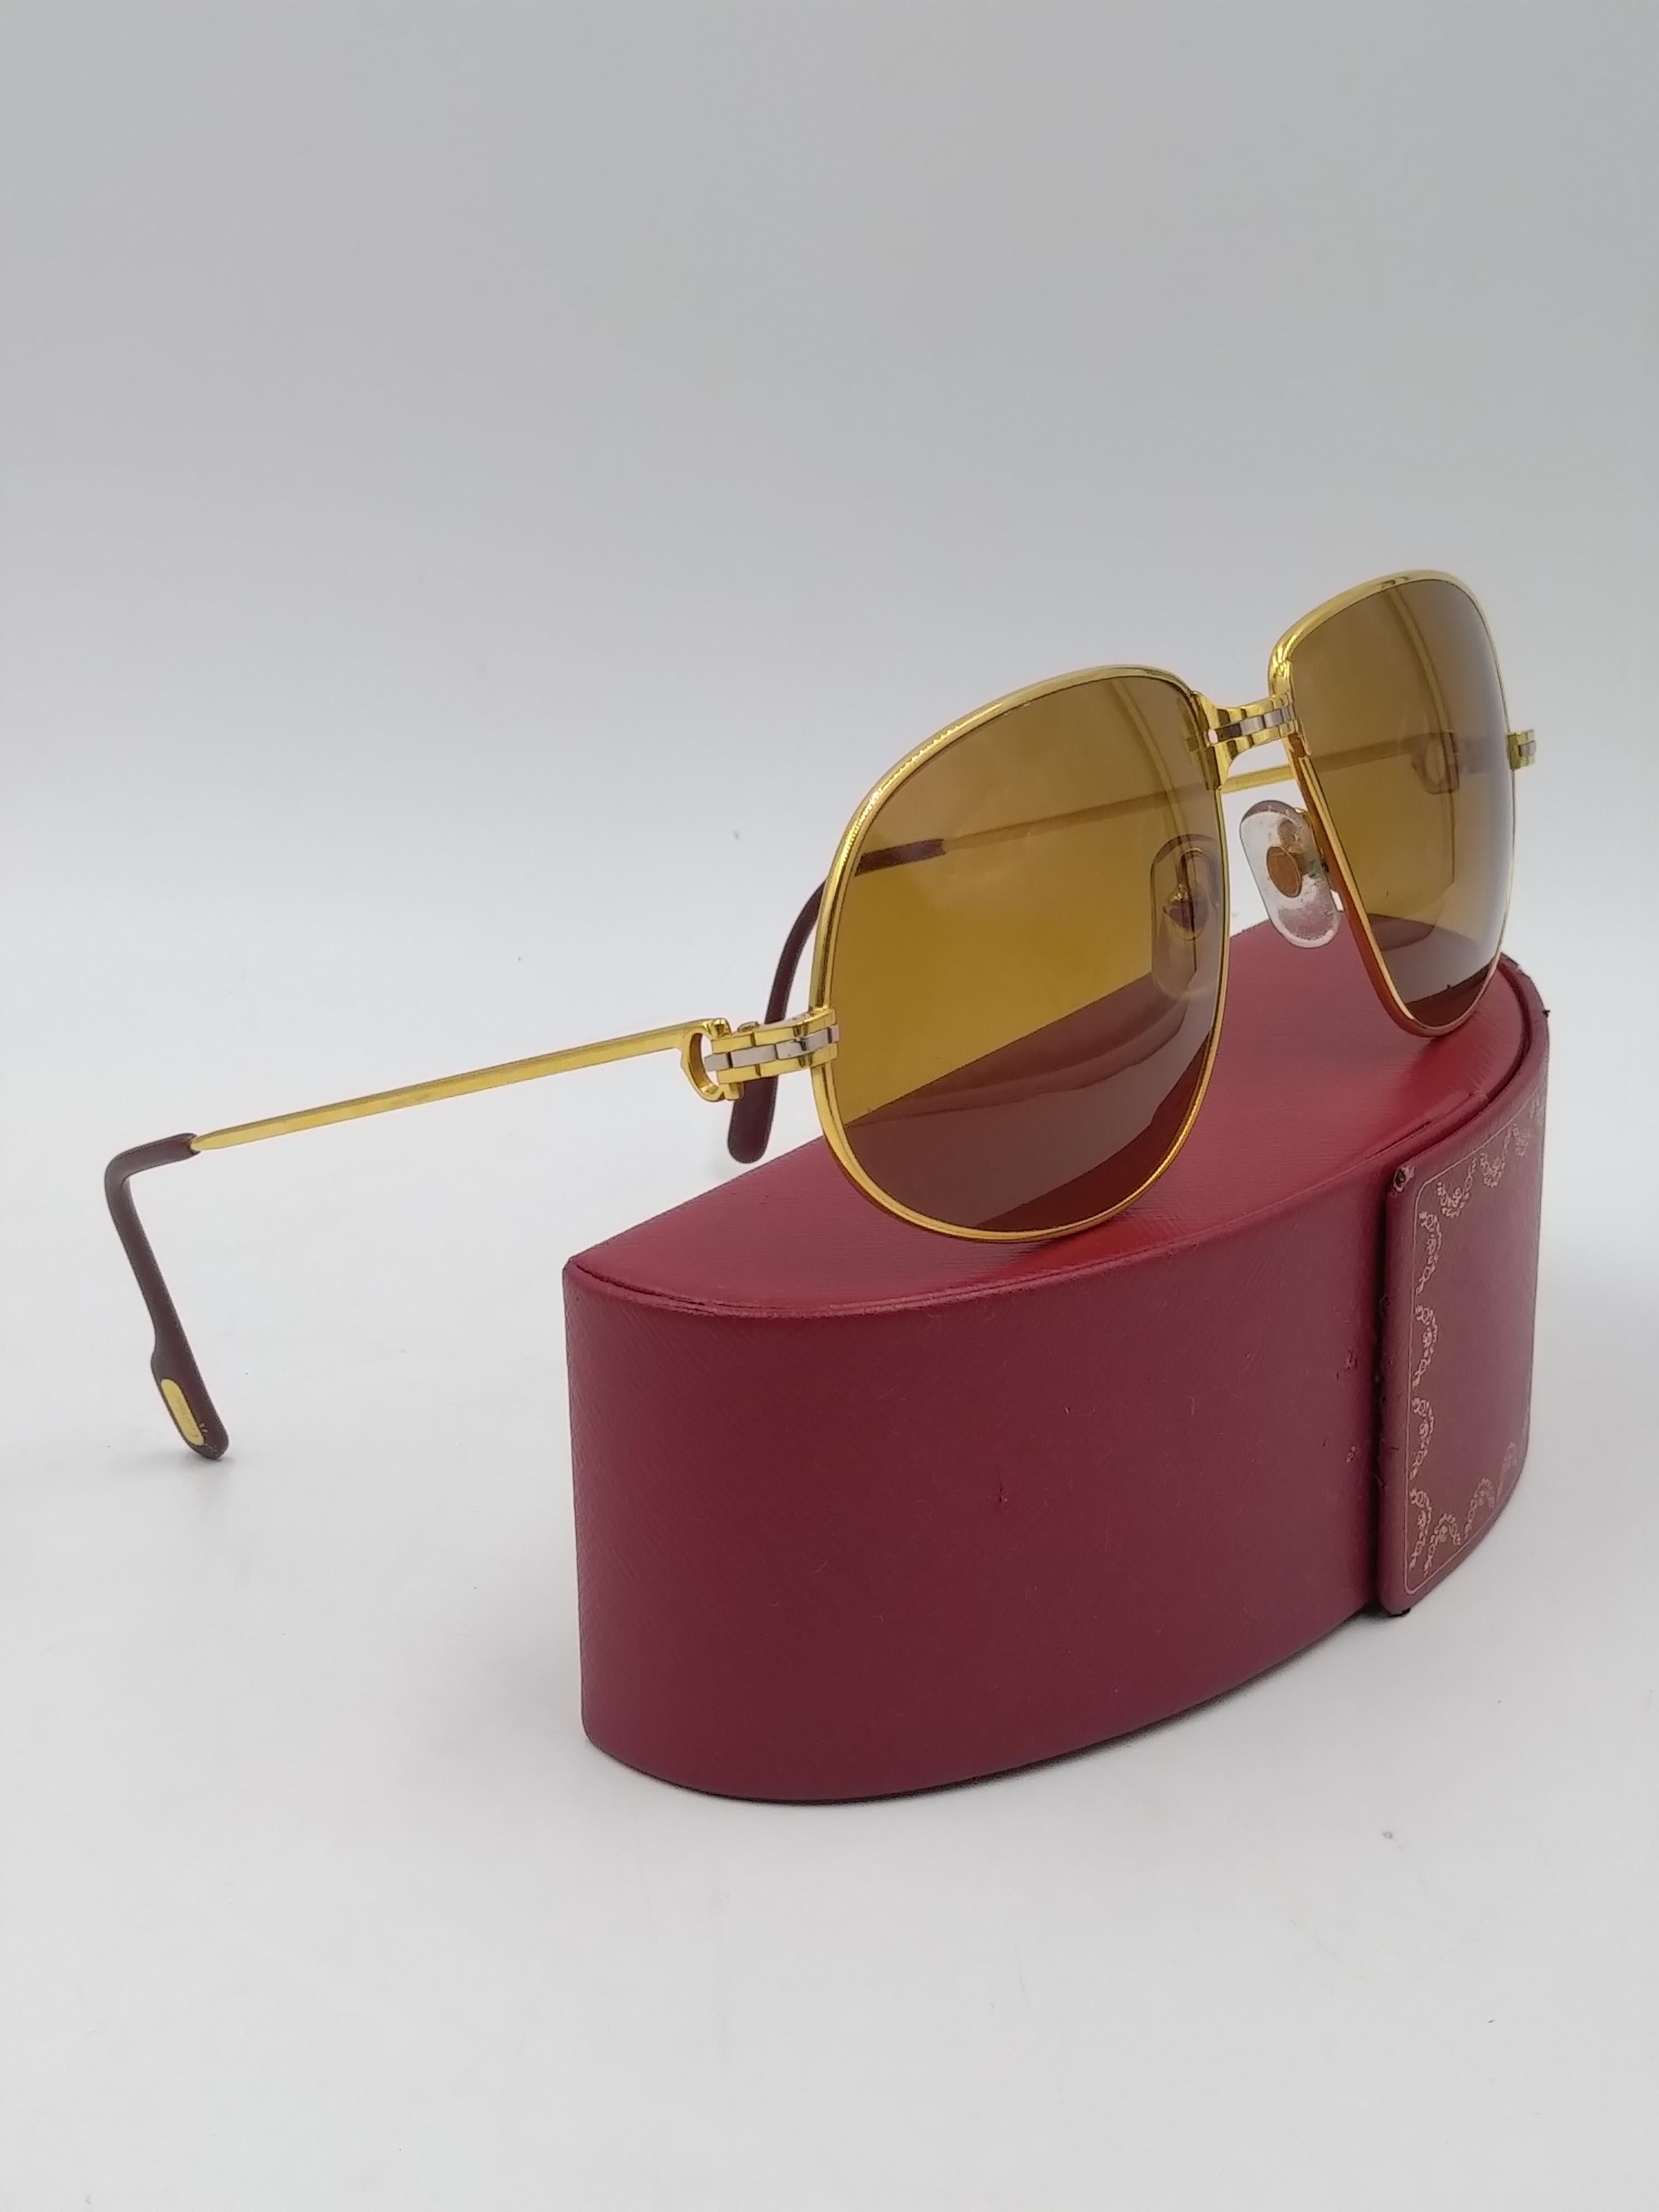 Cartier Panthere 63/16 Gold Plated Sunglasses, 1988
-100% authentic Cartier
- Size 63-16 / 140 (large size)
- Brown lenses
- Serial Number E 040230